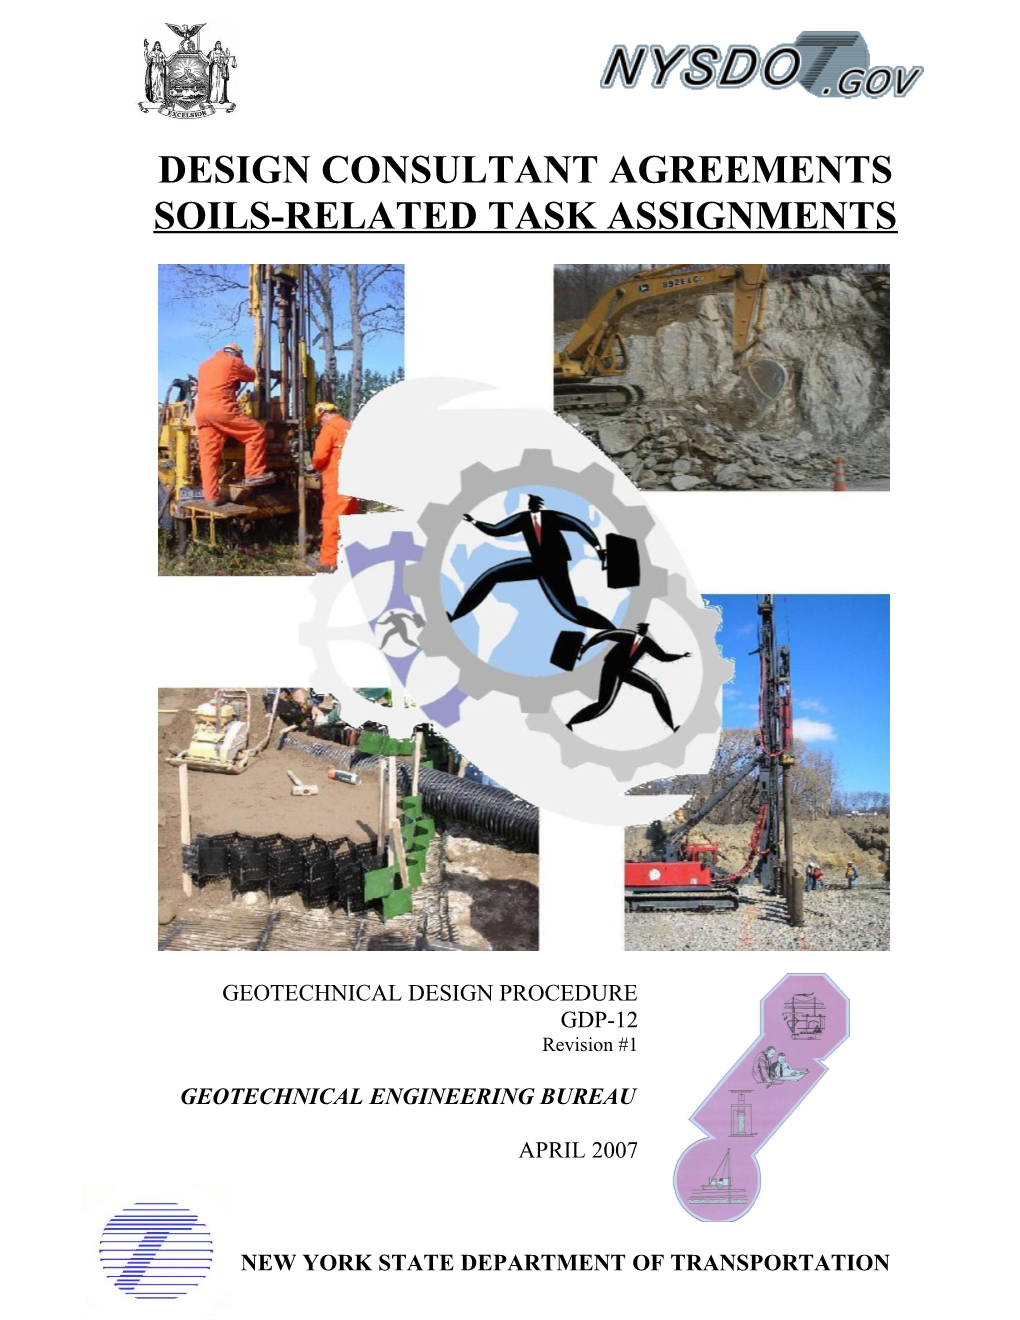 Soils-Related Task Assignments